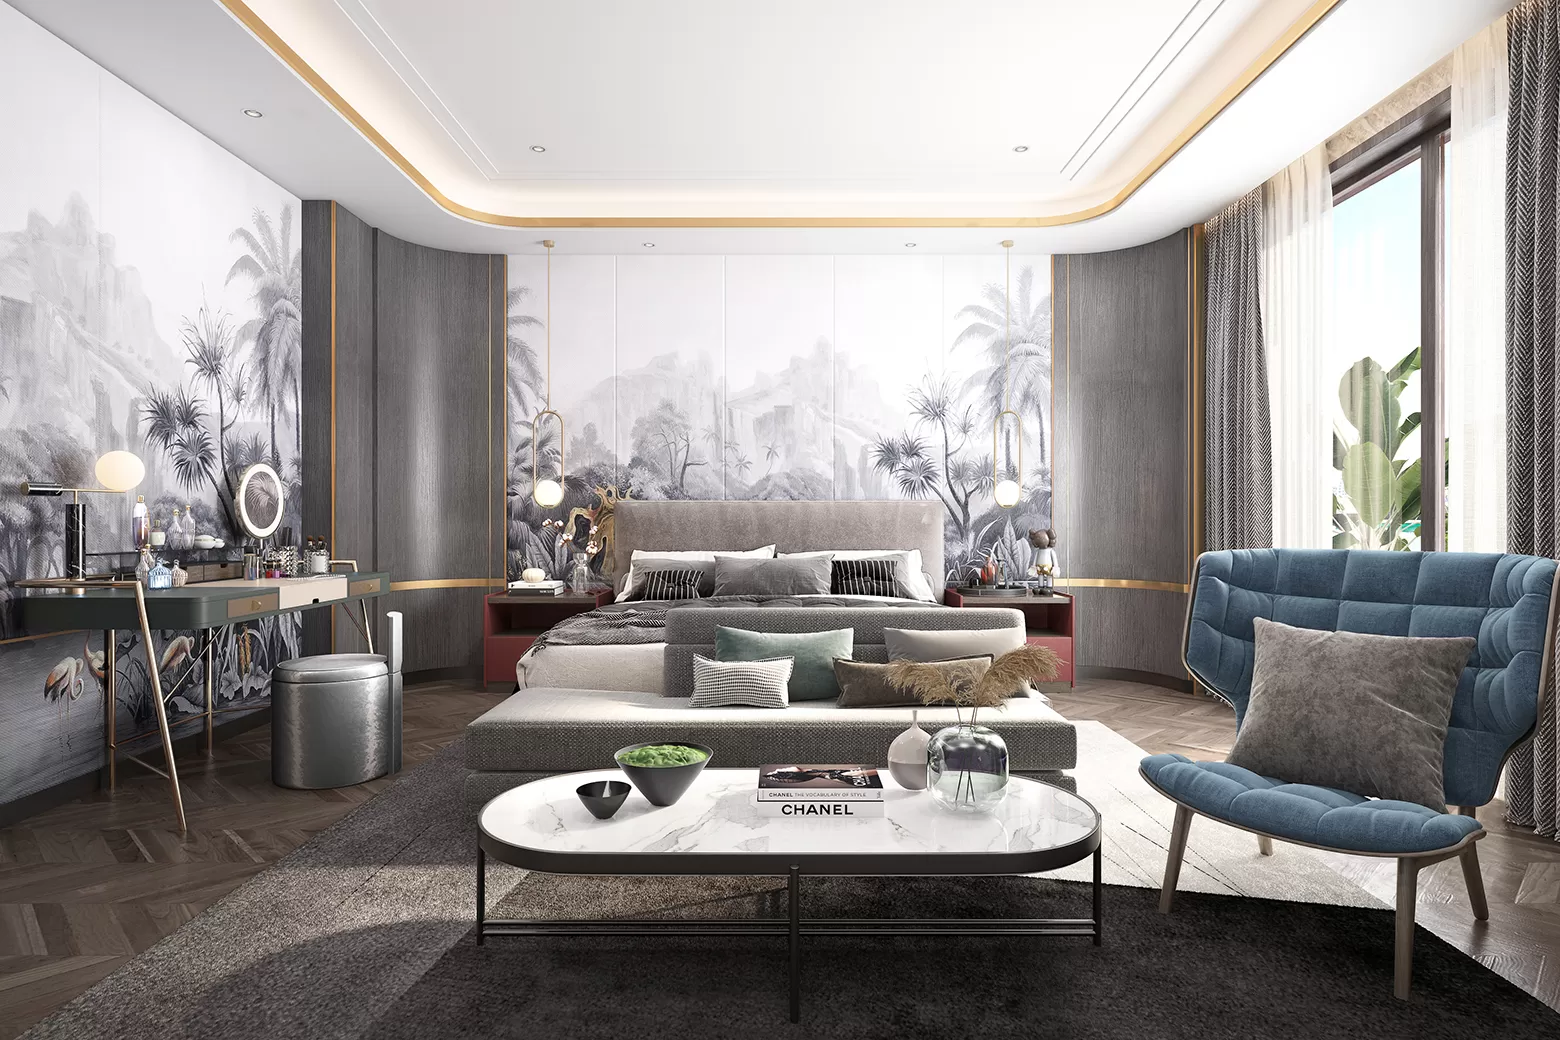 DESMOD INTERIOR 2021 (VRAY)/5. BEDROOM – 2. CHINESE STYLES – 172